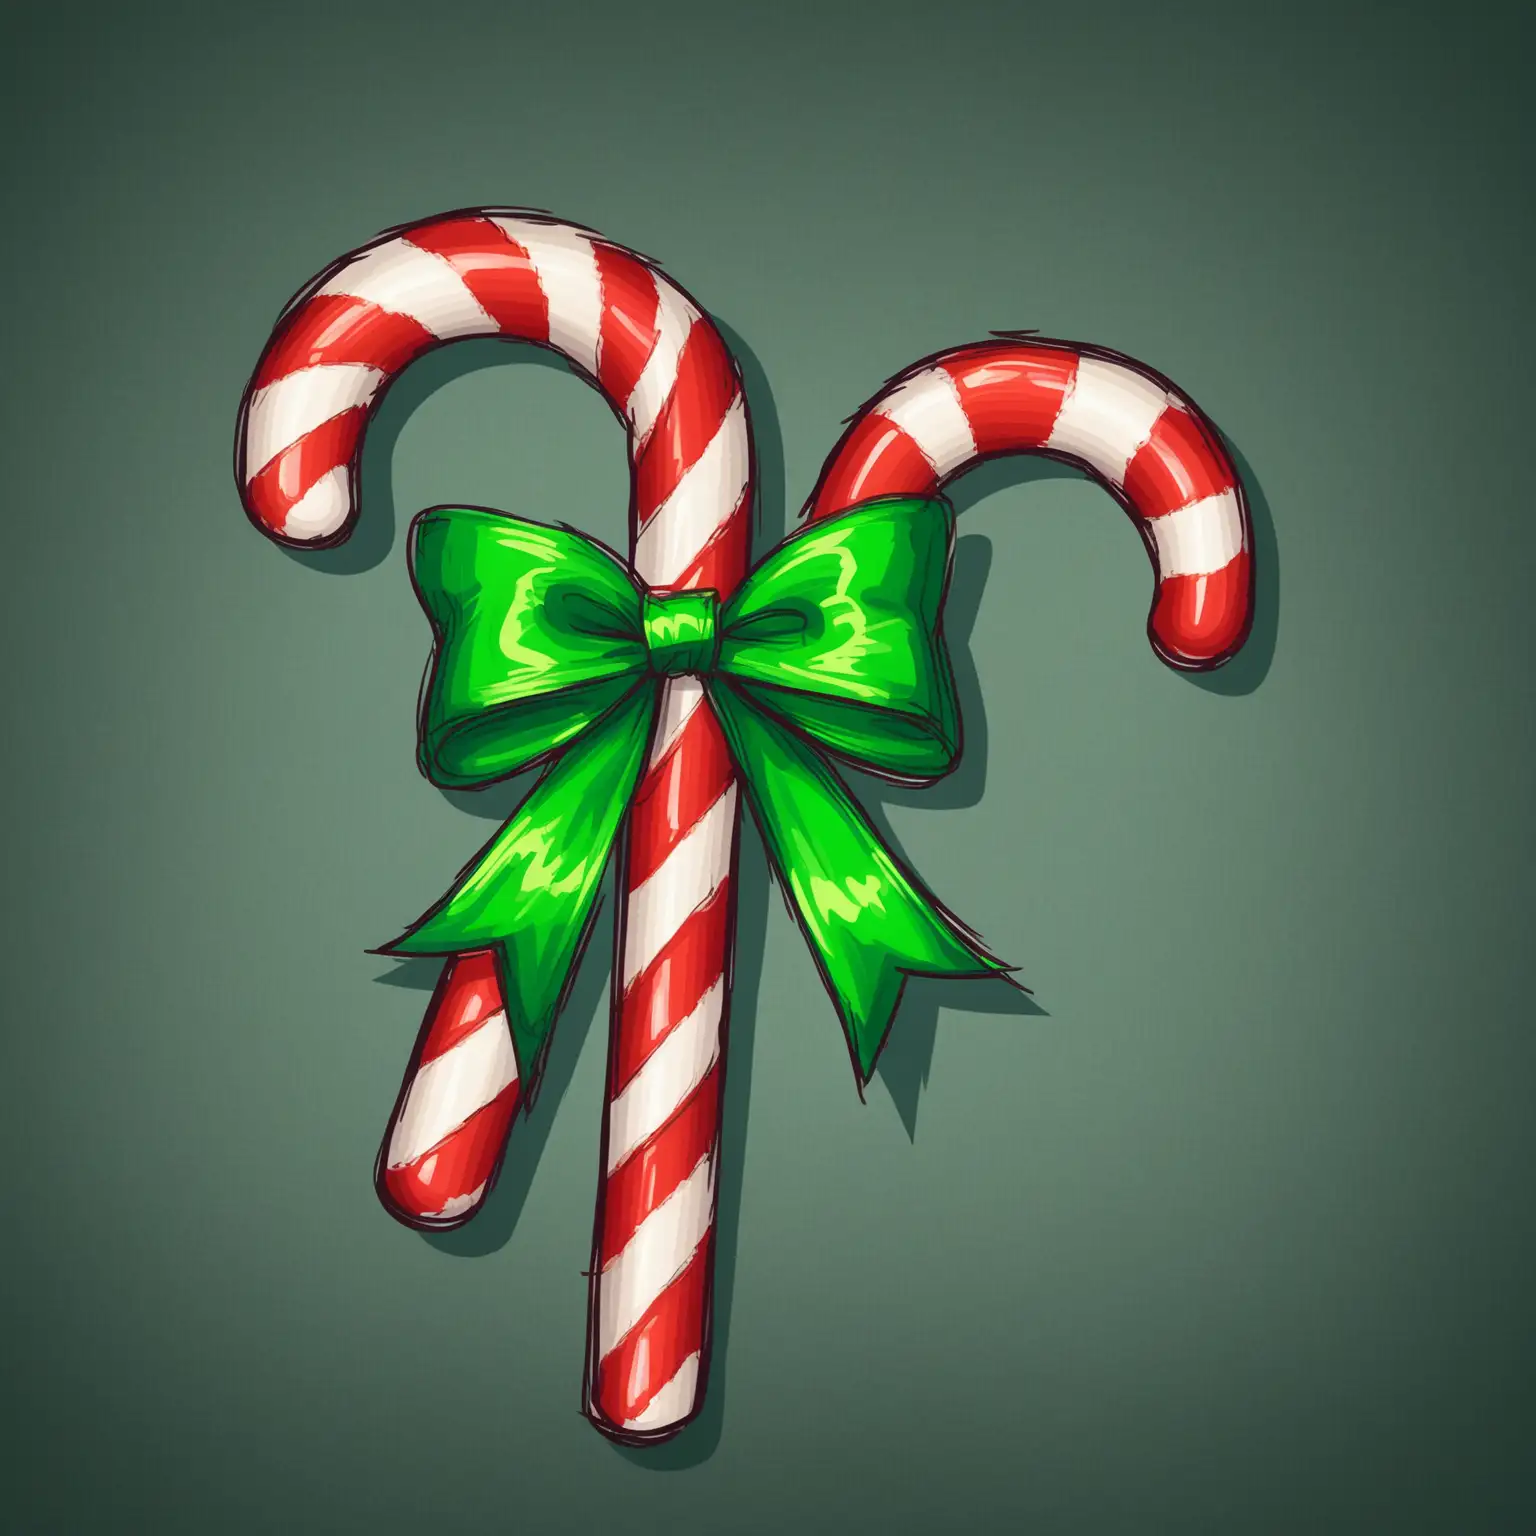 Create the same sketch of white and red Christmas Candy Cane with green bow